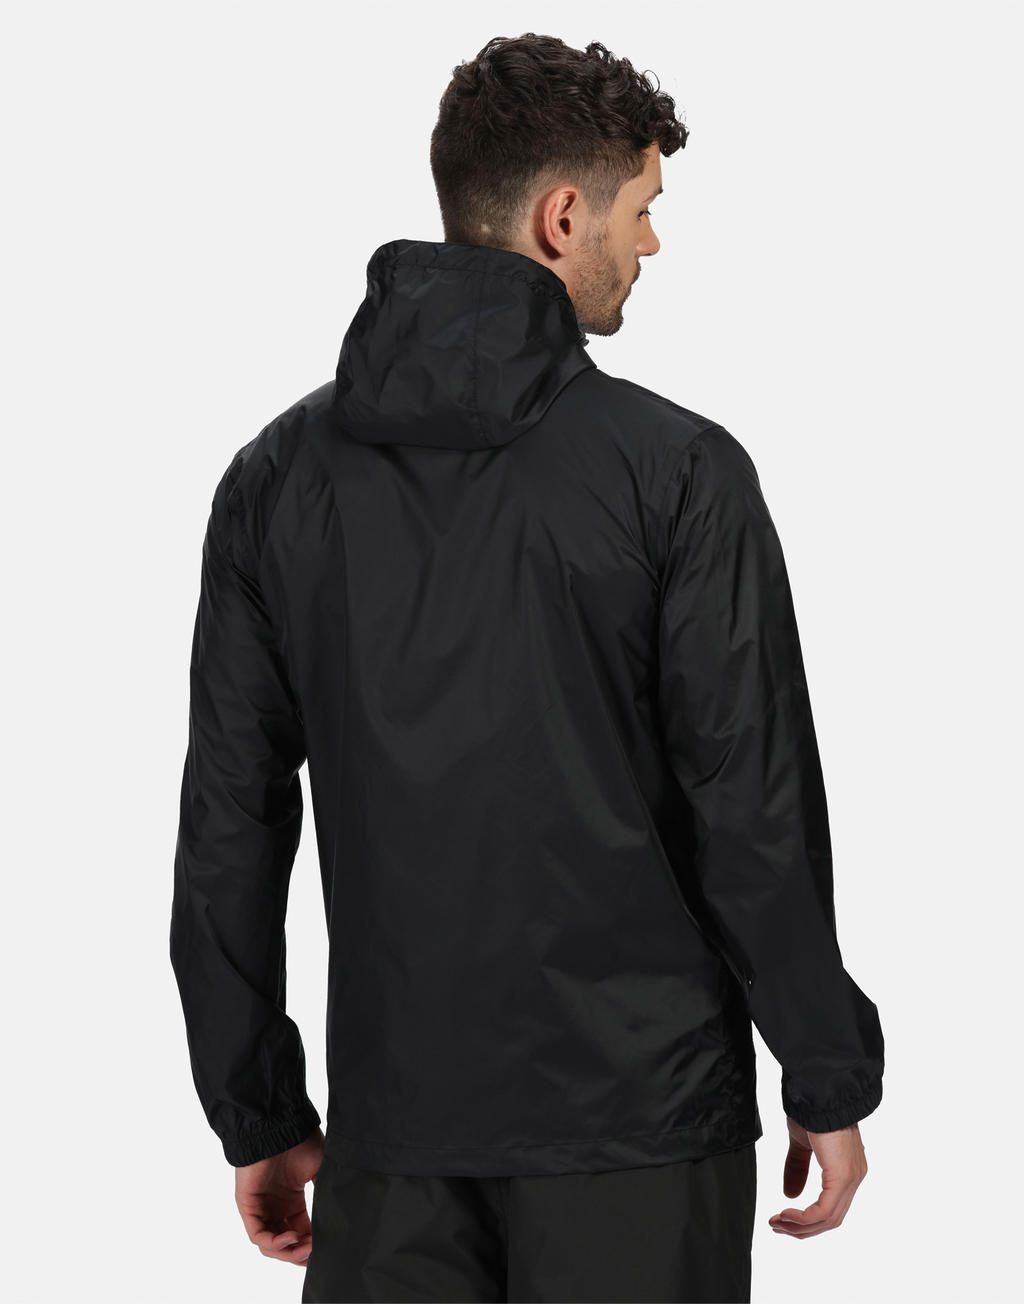  Pro Pack Away Jacket in Farbe Black